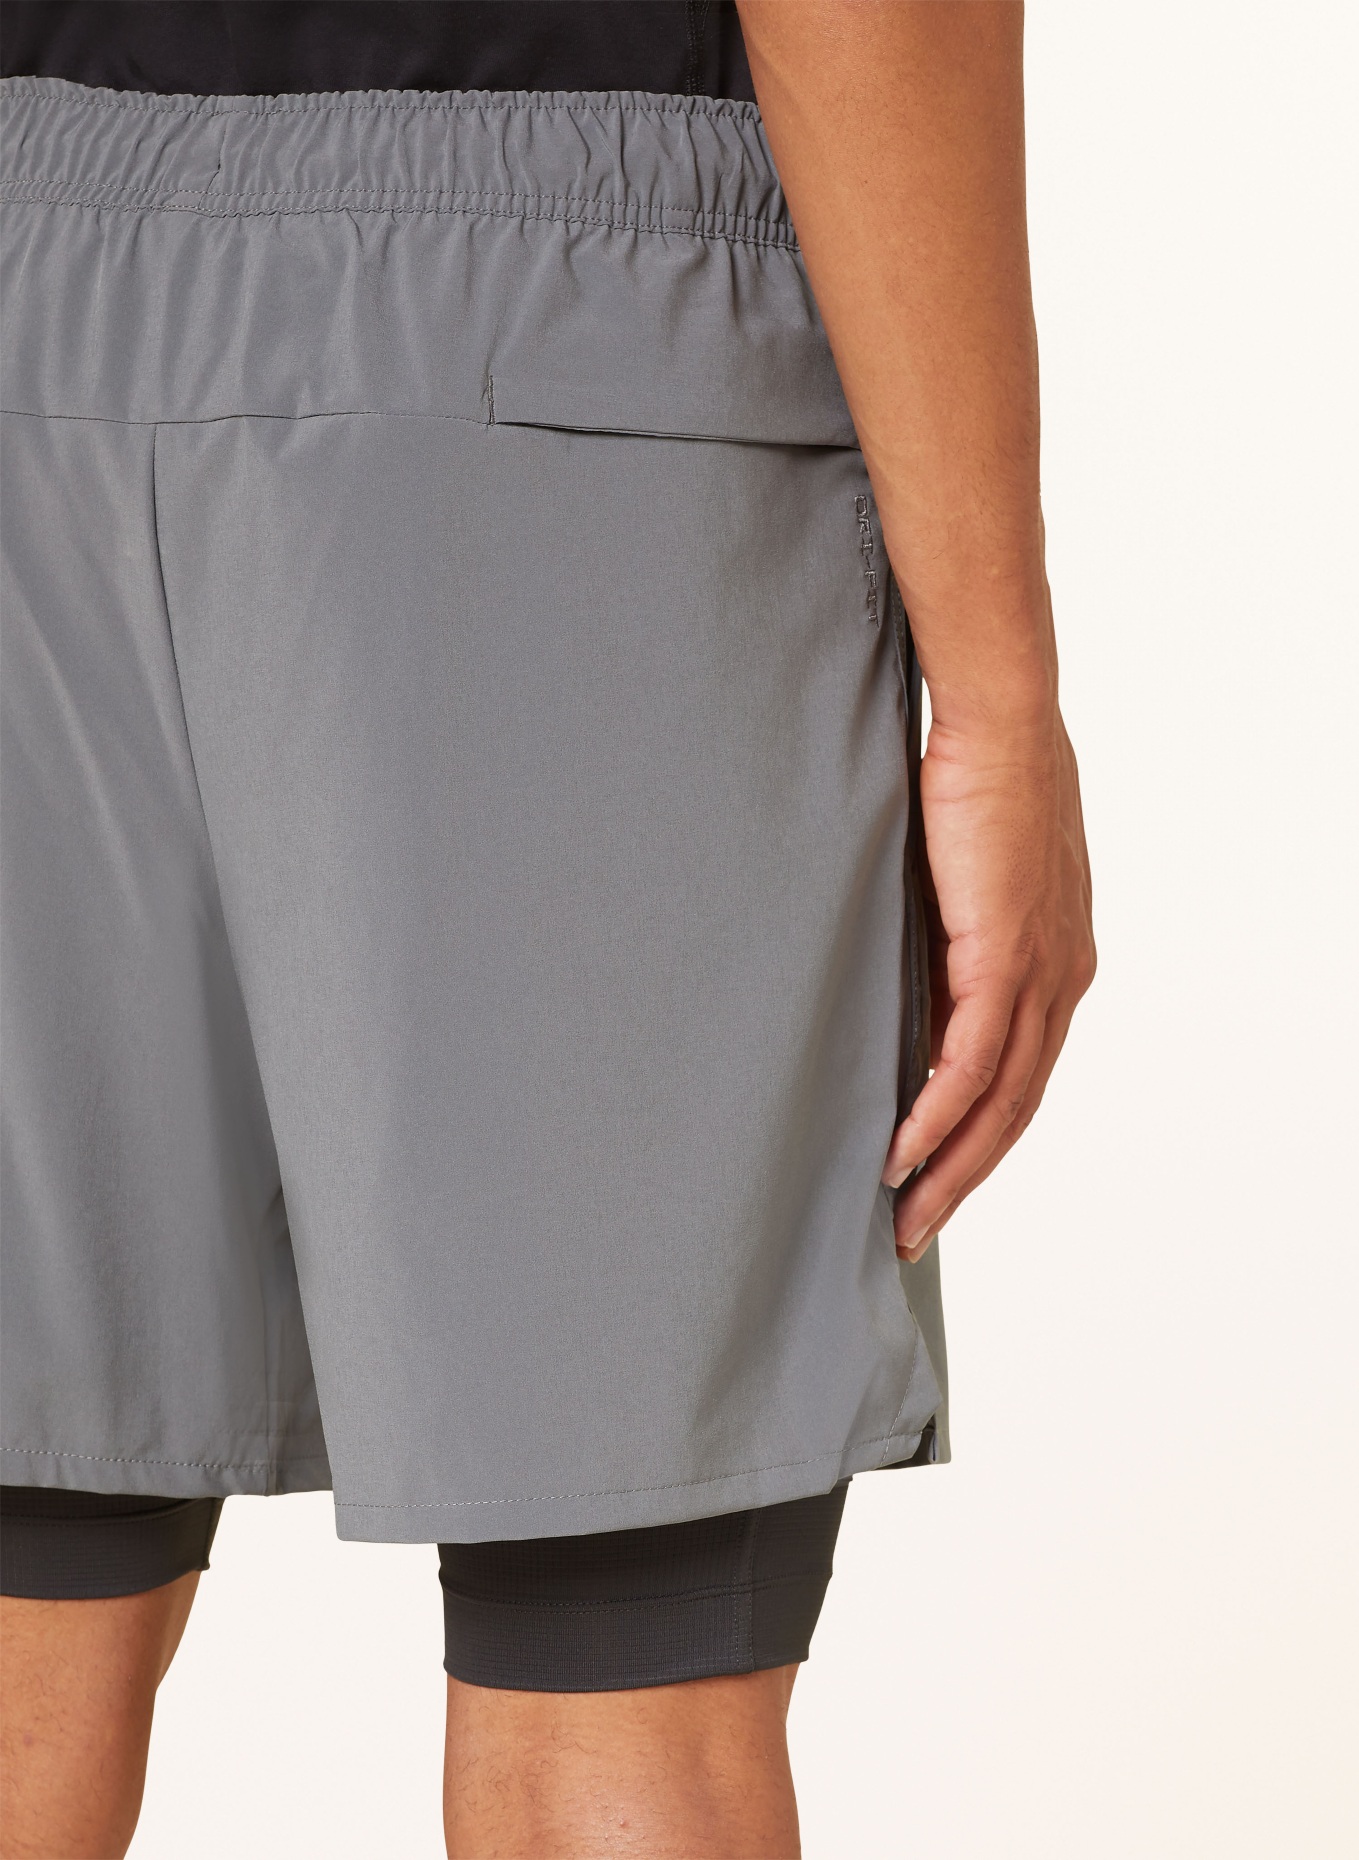 Nike 2-in-1 training shorts DRI-FIT UNLIMITED, Color: GRAY (Image 6)